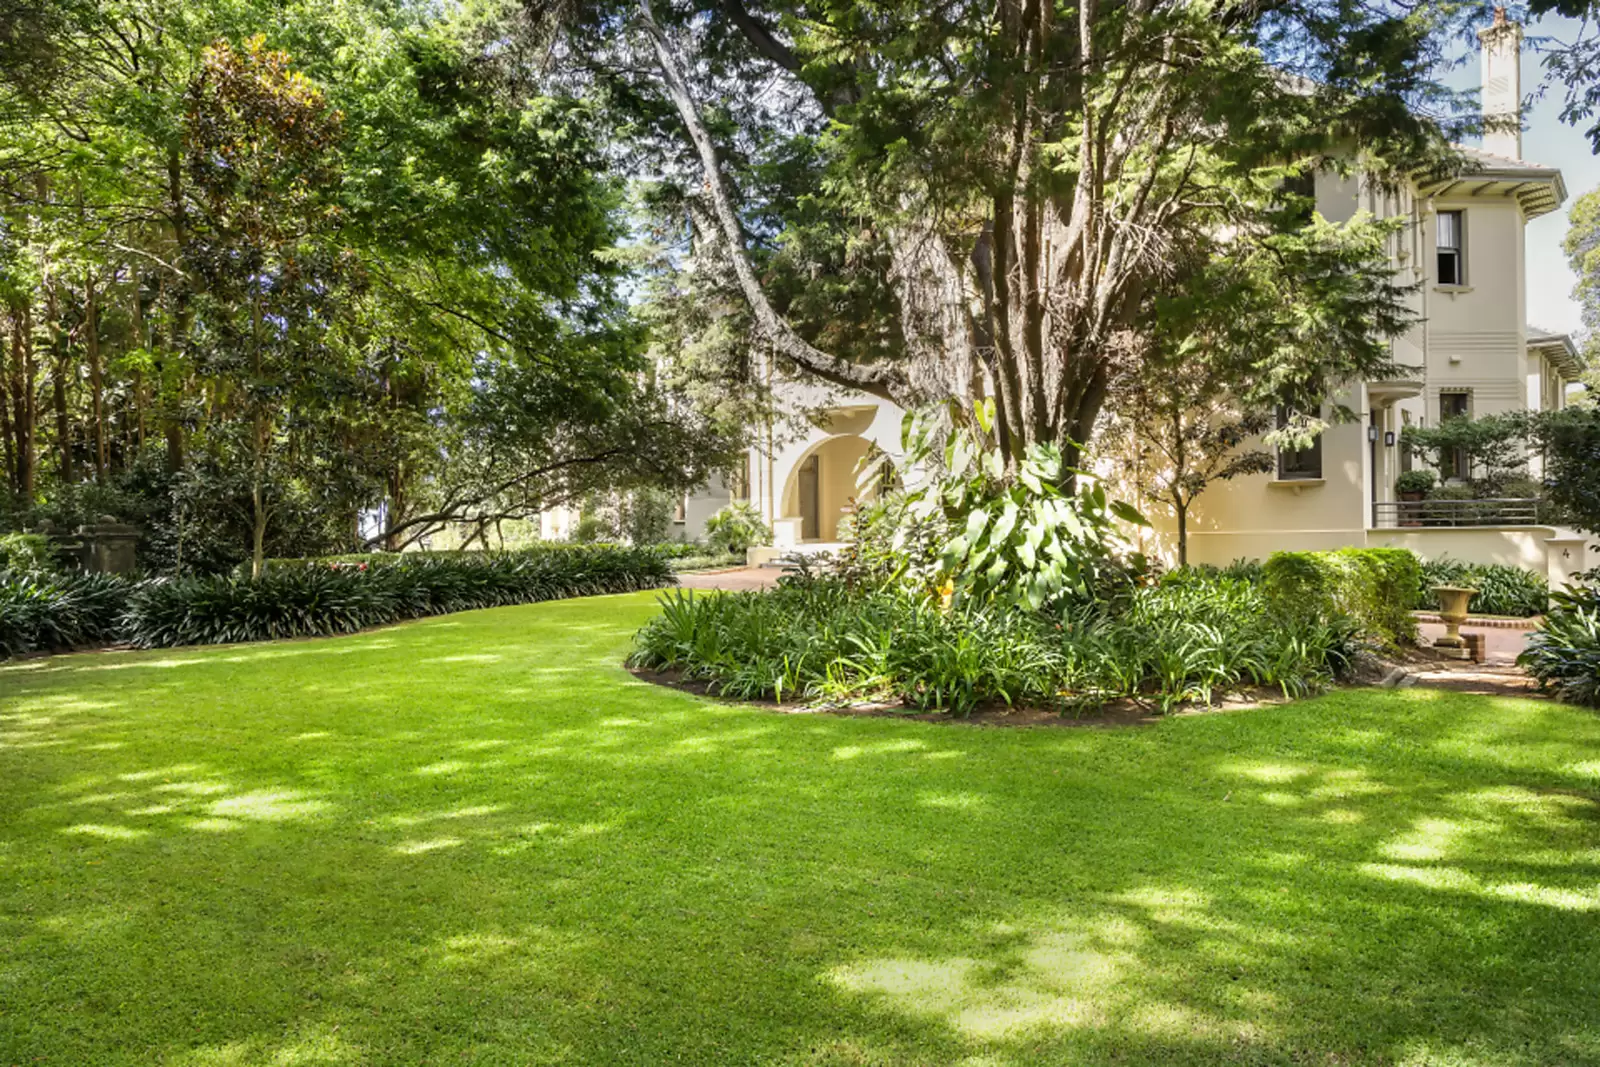 4/1 Mount Adelaide Street, Darling Point For Sale by Sydney Sotheby's International Realty - image 1